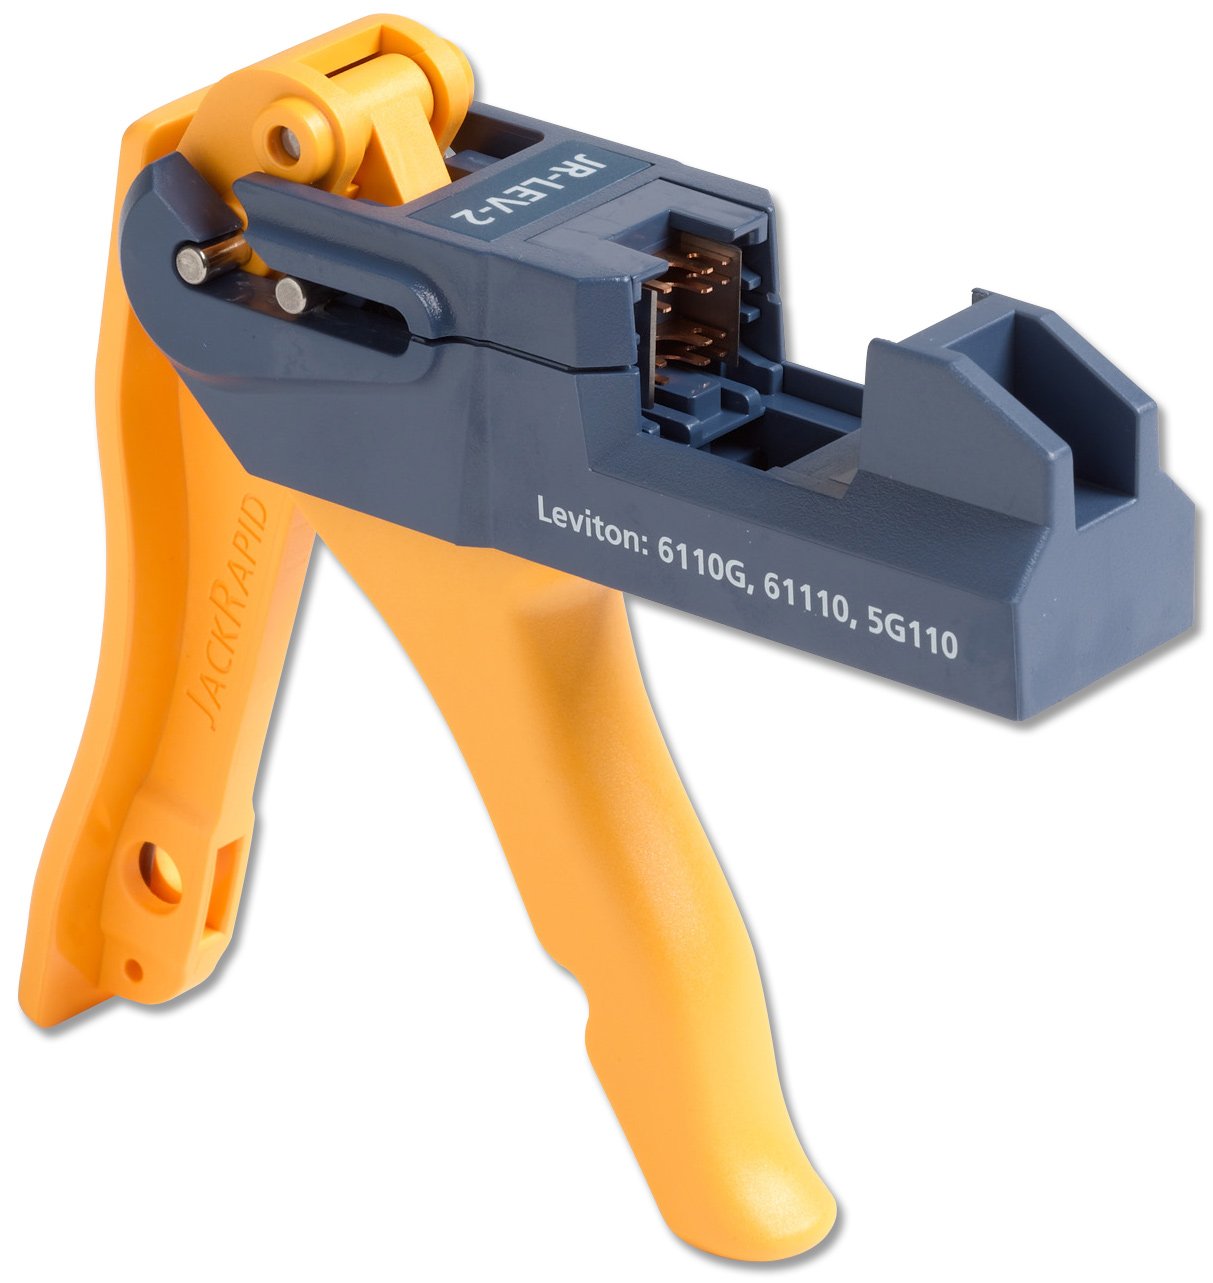 Fluke Networks JR-SYS-2 JackRapid Punch Down Tool for Systimax MGS400, MGS600, MFP420, MFP520